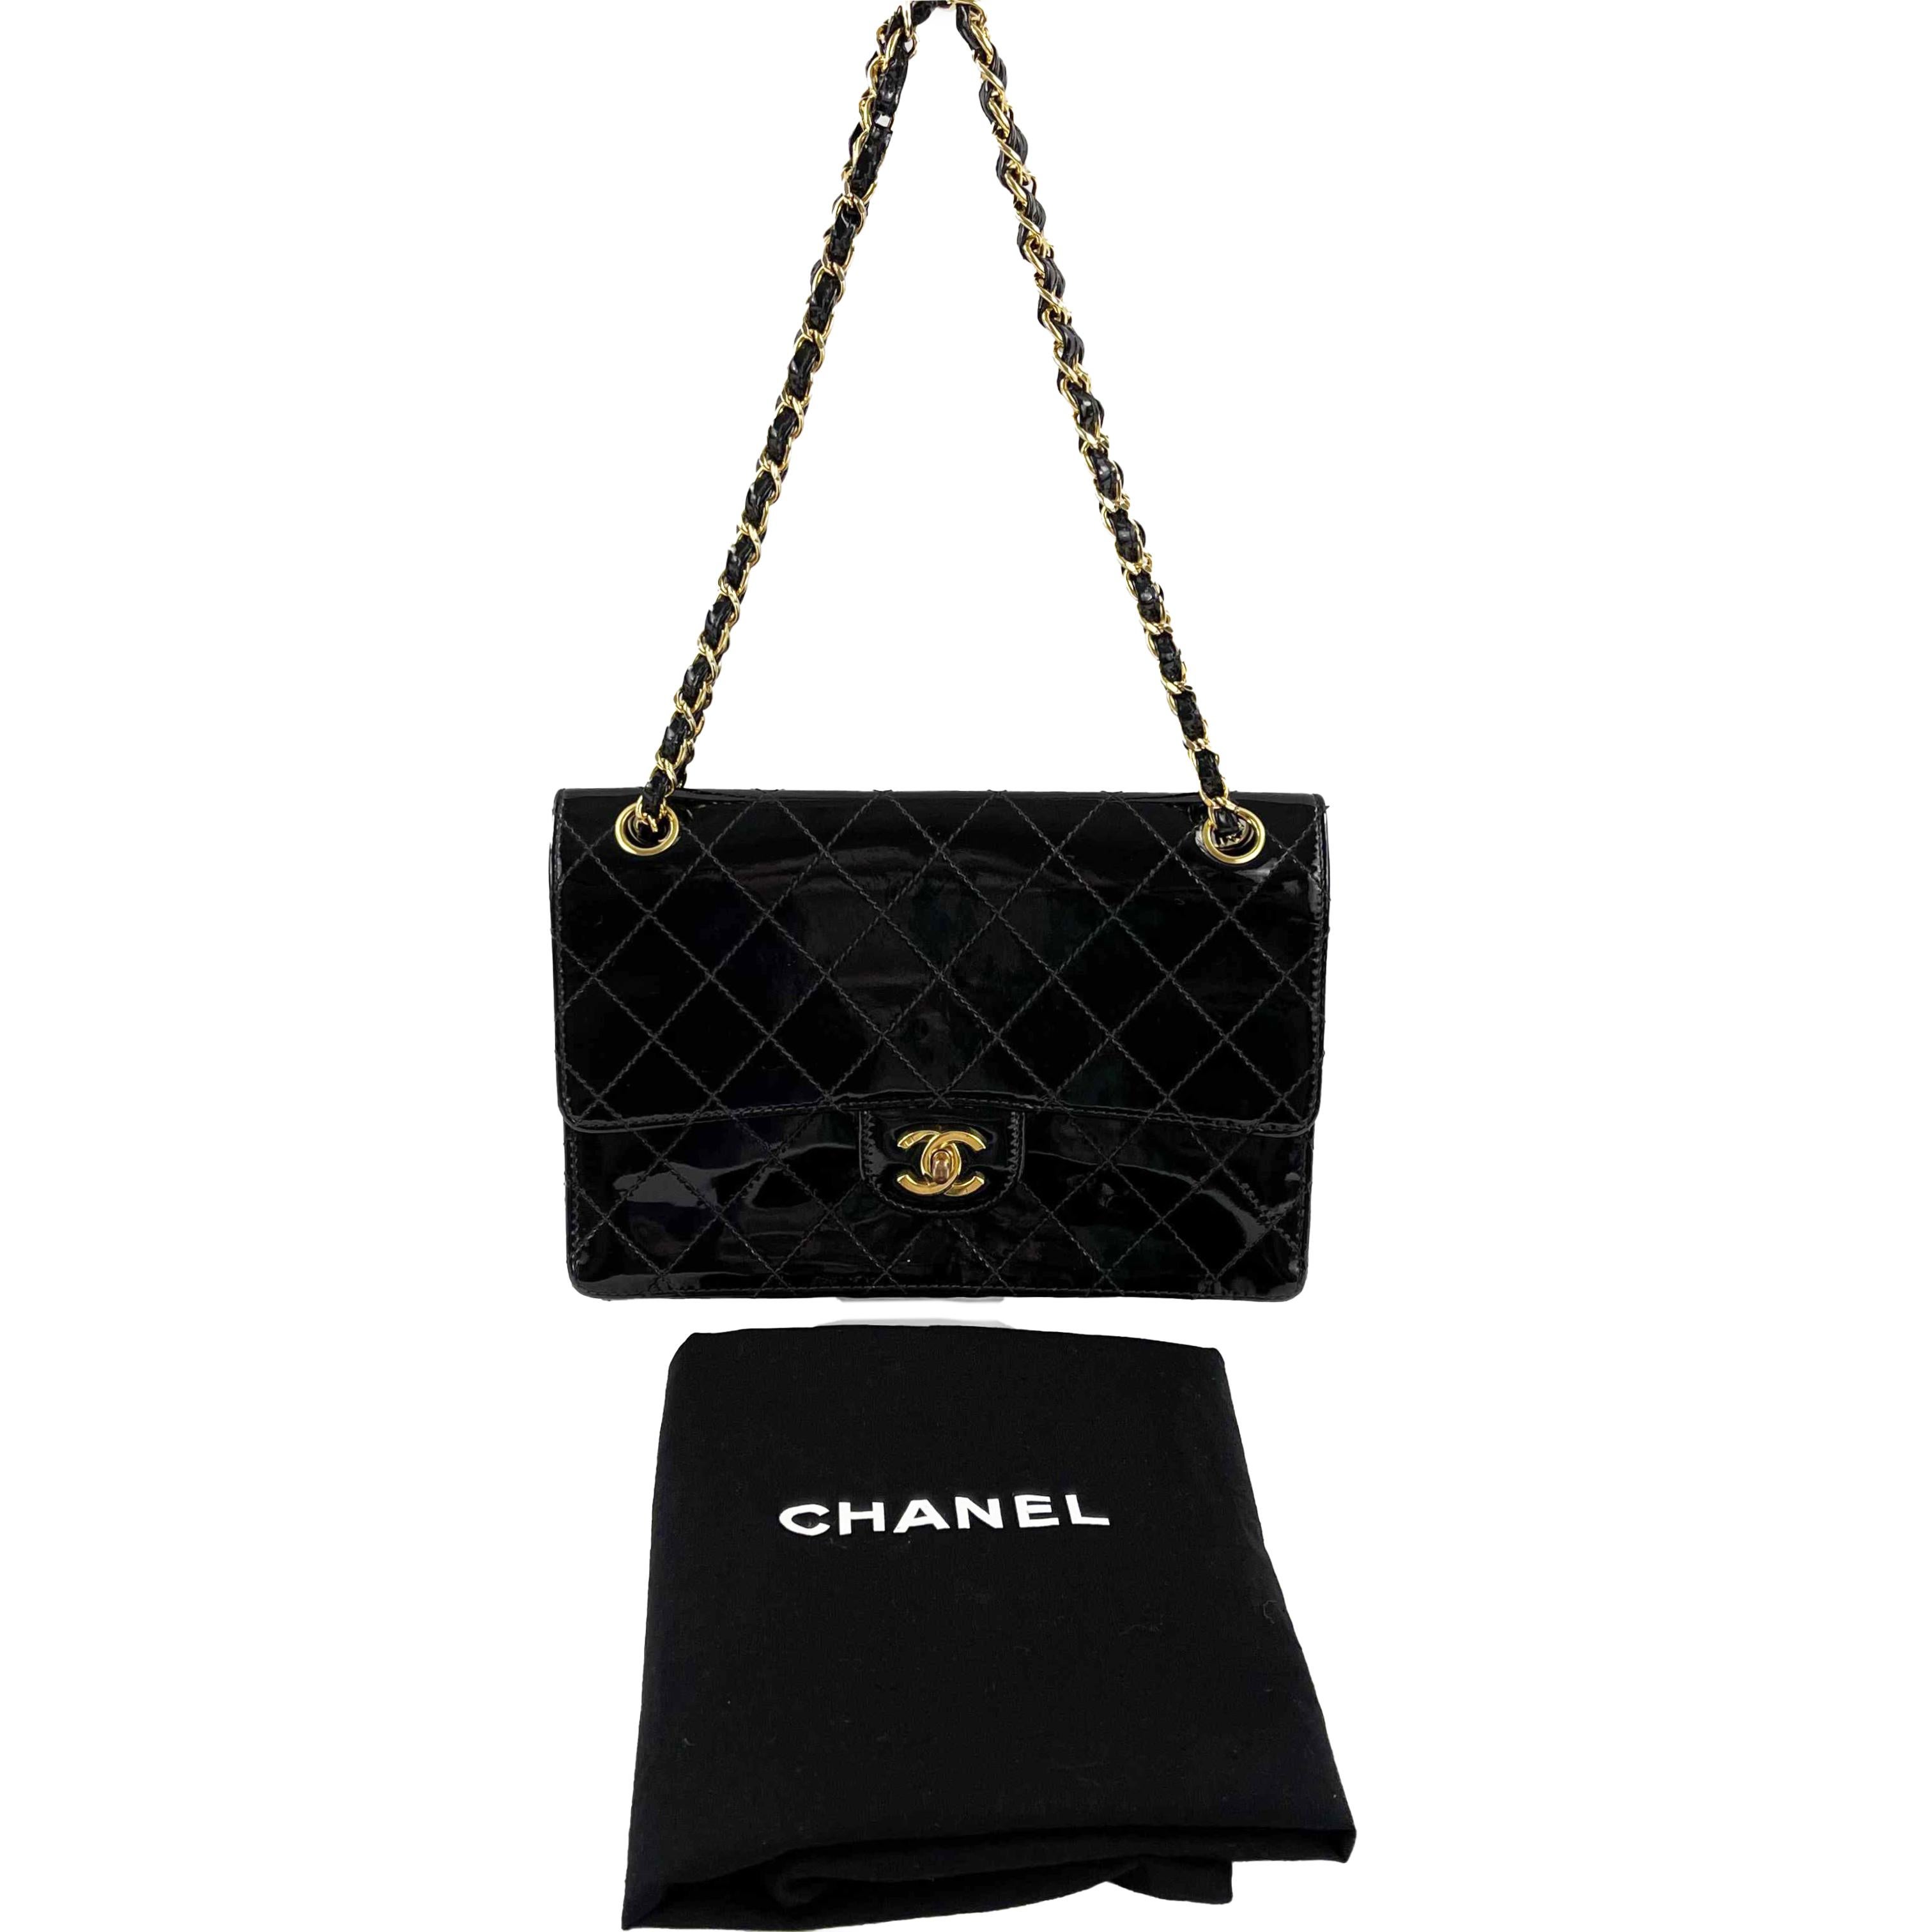 Chanel - Very Good - Vintage Patent Quilted Flap Bag - Black - Handbag

Description

* This beautiful Chanel handbag comes with a certificate of authenticity from Entrupy. The gold CC turnlock opens to a leather interior and will comfortably fit a